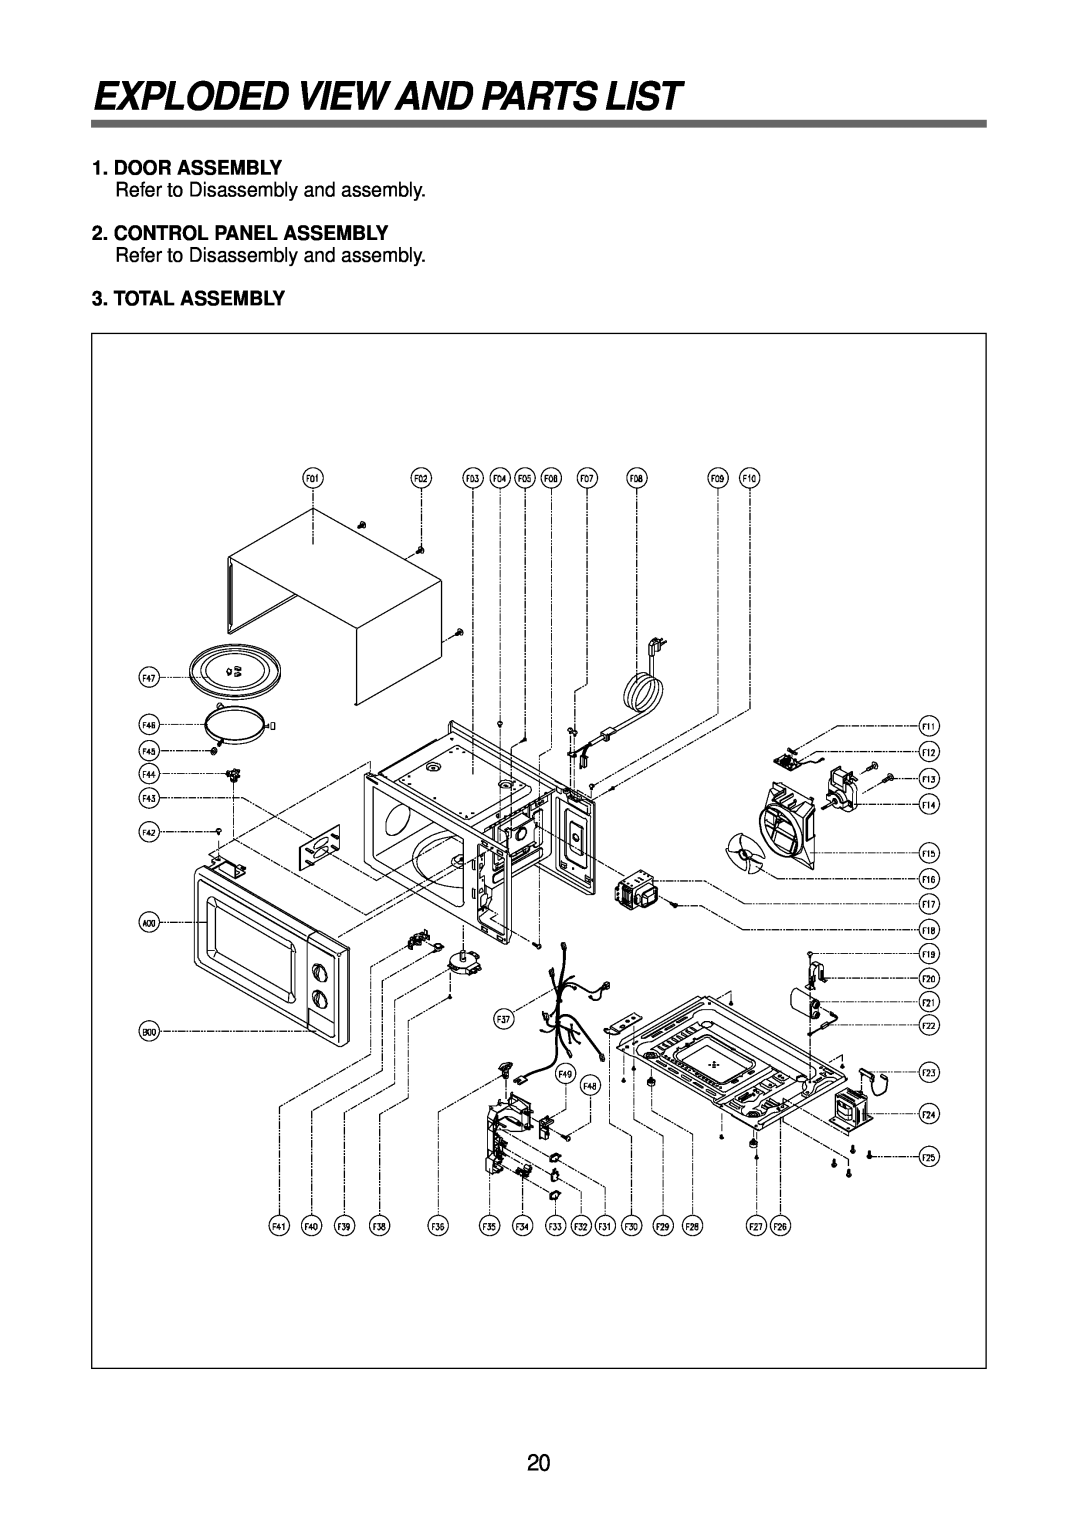 Daewoo KOR-63F70S Exploded View And Parts List, Door Assembly, Refer to Disassembly and assembly, Total Assembly 